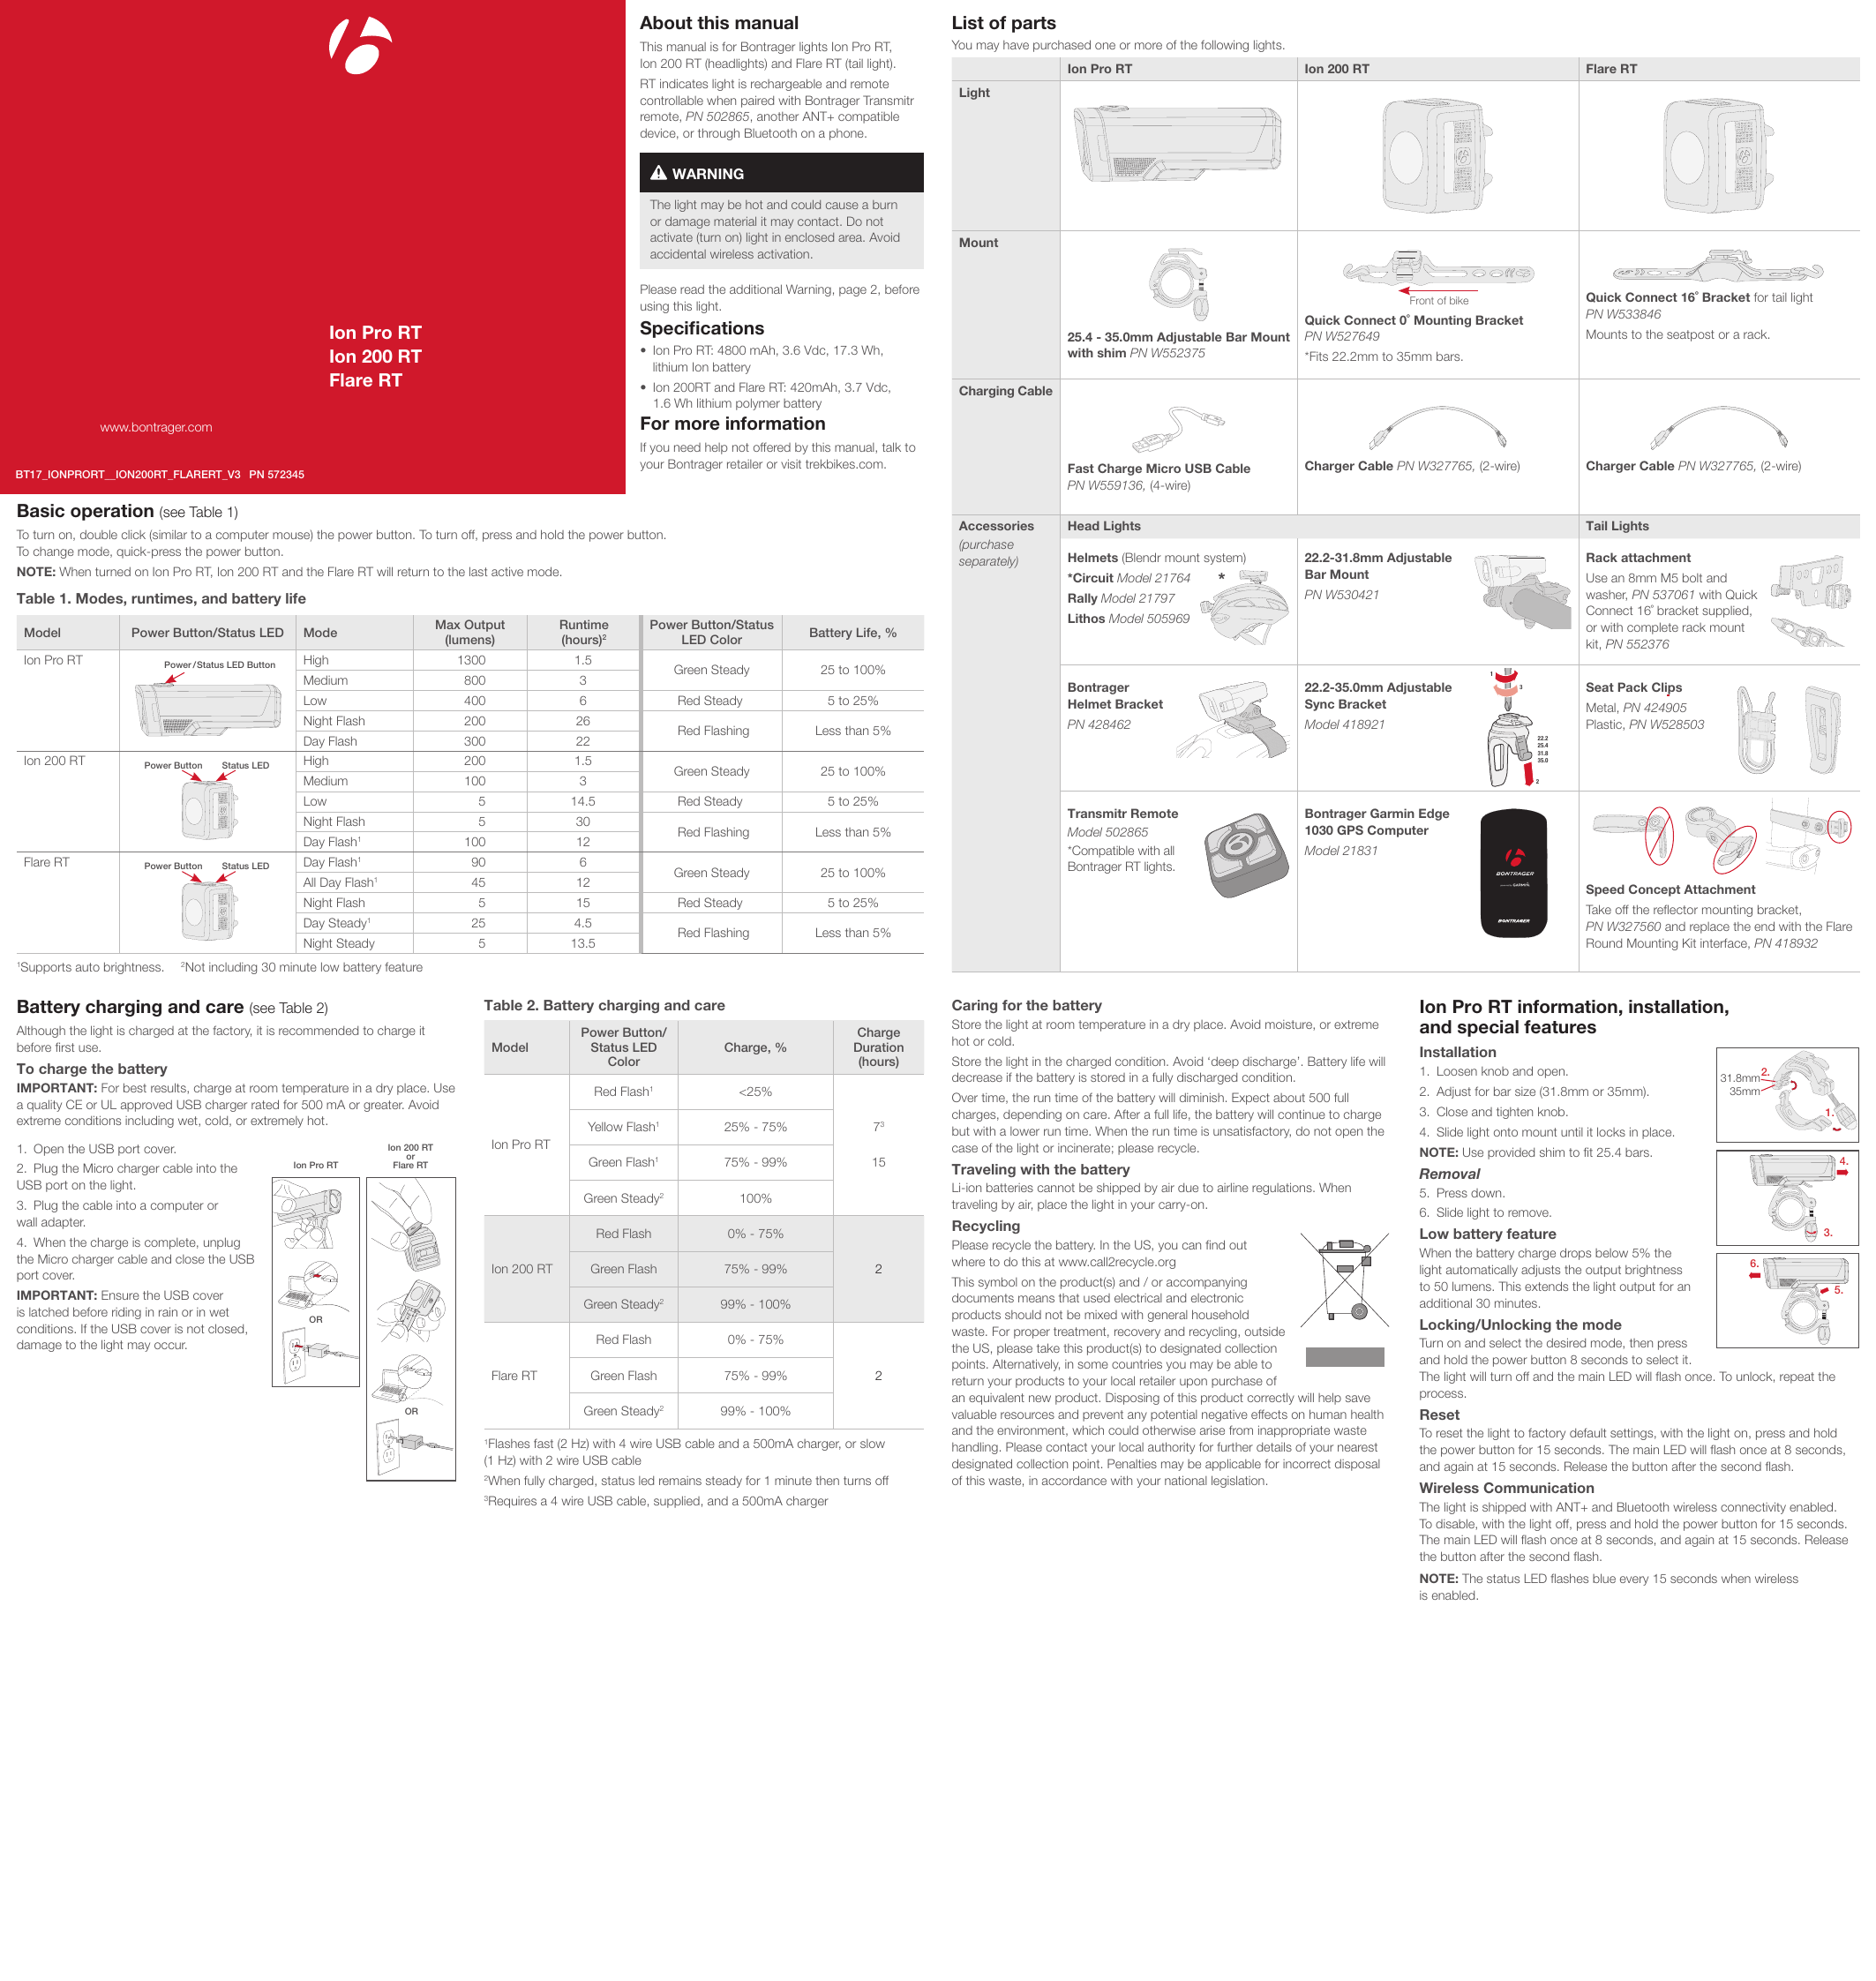 Ion Pro RTIon 200 RTFlare RTwww.bontrager.comBT17_IONPRORT__ION200RT_FLARERT_V3 PN 572345About this manualThis manual is for Bontrager lights Ion Pro RT,  Ion 200 RT (headlights) and Flare RT (tail light).RT indicates light is rechargeable and remote controllable when paired with Bontrager Transmitr remote, PN 502865, another ANT+ compatible device, or through Bluetooth on a phone. The light may be hot and could cause a burn or damage material it may contact. Do not activate (turn on) light in enclosed area. Avoid accidental wireless activation.WARNINGPlease read the additional Warning, page 2, before using this light.Speciﬁcations•   Ion Pro RT: 4800 mAh, 3.6 Vdc, 17.3 Wh,  lithium Ion battery•   Ion 200RT and Flare RT: 420mAh, 3.7 Vdc,  1.6 Wh lithium polymer batteryFor more informationIf you need help not offered by this manual, talk to your Bontrager retailer or visit trekbikes.com.List of parts You may have purchased one or more of the following lights. Ion Pro RT Ion 200 RT Flare RTLightMount25.4 - 35.0mm Adjustable Bar Mount with shim PN W552375Front of bikeQuick Connect 0˚ Mounting Bracket  PN W527649 *Fits 22.2mm to 35mm bars.Quick Connect 16˚ Bracket for tail light  PN W533846 Mounts to the seatpost or a rack. Charging CableFast Charge Micro USB Cable  PN W559136, (4-wire)Charger Cable PN W327765, (2-wire) Charger Cable PN W327765, (2-wire)Accessories(purchase  separately)Head Lights Tail LightsHelmets (Blendr mount system)*Circuit Model 21764Rally Model 21797Lithos Model 50596922.2-31.8mm Adjustable  Bar MountPN W530421Rack attachment Use an 8mm M5 bolt and  washer, PN 537061 with Quick  Connect 16˚ bracket supplied, or with complete rack mount kit, PN 552376Bontrager  Helmet BracketPN 42846222.2-35.0mm Adjustable  Sync BracketModel 418921Seat Pack ClipsMetal, PN 424905 Plastic, PN W528503Transmitr RemoteModel 502865*Compatible with all  Bontrager RT lights.Bontrager Garmin Edge  1030 GPS ComputerModel 21831Speed Concept AttachmentTake off the reﬂector mounting bracket,  PN W327560 and replace the end with the Flare Round Mounting Kit interface, PN 418932*22.225.431.835.0132Basic operation (see Table 1)To turn on, double click (similar to a computer mouse) the power button. To turn off, press and hold the power button.  To change mode, quick-press the power button. NOTE: When turned on Ion Pro RT, Ion 200 RT and the Flare RT will return to the last active mode.Battery charging and care (see Table 2)Although the light is charged at the factory, it is recommended to charge it before ﬁrst use.To charge the battery IMPORTANT: For best results, charge at room temperature in a dry place. Use a quality CE or UL approved USB charger rated for 500 mA or greater. Avoid extreme conditions including wet, cold, or extremely hot. 1.  Open the USB port cover.2.  Plug the Micro charger cable into the USB port on the light.3.  Plug the cable into a computer or  wall adapter.4.  When the charge is complete, unplug the Micro charger cable and close the USB port cover.IMPORTANT: Ensure the USB cover is latched before riding in rain or in wet conditions. If the USB cover is not closed, damage to the light may occur.Table 2. Battery charging and careModelPower Button/Status LED  ColorCharge, %Charge Duration (hours)Ion Pro RTRed Flash1&lt;25%Yellow Flash125% - 75% 73Green Flash175% - 99% 15Green Steady2  100% Ion 200 RTRed Flash 0% - 75%2Green Flash 75% - 99%Green Steady2  99% - 100%Flare RTRed Flash 0% - 75%2Green Flash 75% - 99%Green Steady2  99% - 100%1Flashes fast (2 Hz) with 4 wire USB cable and a 500mA charger, or slow  (1 Hz) with 2 wire USB cable2When fully charged, status led remains steady for 1 minute then turns off 3Requires a 4 wire USB cable, supplied, and a 500mA charger  Ion Pro RTIon 200 RT or Flare RTORORCaring for the batteryStore the light at room temperature in a dry place. Avoid moisture, or extreme hot or cold. Store the light in the charged condition. Avoid ‘deep discharge’. Battery life will decrease if the battery is stored in a fully discharged condition. Over time, the run time of the battery will diminish. Expect about 500 full charges, depending on care. After a full life, the battery will continue to charge but with a lower run time. When the run time is unsatisfactory, do not open the case of the light or incinerate; please recycle. Traveling with the battery Li-ion batteries cannot be shipped by air due to airline regulations. When traveling by air, place the light in your carry-on.RecyclingPlease recycle the battery. In the US, you can ﬁnd out  where to do this at www.call2recycle.orgThis symbol on the product(s) and / or accompanying documents means that used electrical and electronic products should not be mixed with general household waste. For proper treatment, recovery and recycling, outside the US, please take this product(s) to designated collection points. Alternatively, in some countries you may be able to return your products to your local retailer upon purchase of an equivalent new product. Disposing of this product correctly will help save valuable resources and prevent any potential negative effects on human health and the environment, which could otherwise arise from inappropriate waste handling. Please contact your local authority for further details of your nearest designated collection point. Penalties may be applicable for incorrect disposal of this waste, in accordance with your national legislation.Ion Pro RT information, installation,  and special features Installation 1.  Loosen knob and open.2.  Adjust for bar size (31.8mm or 35mm).3.  Close and tighten knob. 4.  Slide light onto mount until it locks in place.NOTE: Use provided shim to ﬁt 25.4 bars.Removal5.  Press down.6.  Slide light to remove.Low battery feature When the battery charge drops below 5% the light automatically adjusts the output brightness to 50 lumens. This extends the light output for an additional 30 minutes. Locking/Unlocking the modeTurn on and select the desired mode, then press and hold the power button 8 seconds to select it. The light will turn off and the main LED will ﬂash once. To unlock, repeat the process.Reset To reset the light to factory default settings, with the light on, press and hold  the power button for 15 seconds. The main LED will ﬂash once at 8 seconds, and again at 15 seconds. Release the button after the second ﬂash.Wireless Communication The light is shipped with ANT+ and Bluetooth wireless connectivity enabled.  To disable, with the light off, press and hold the power button for 15 seconds. The main LED will ﬂash once at 8 seconds, and again at 15 seconds. Release the button after the second ﬂash.NOTE: The status LED ﬂashes blue every 15 seconds when wireless  is enabled.31.8mm35mm1.2.3.4.5.6.Table 1. Modes, runtimes, and battery lifeModel Power Button/Status LED Mode Max Output  (lumens)Runtime  (hours)2Power Button/Status LED Color Battery Life, %Ion Pro RT Power / Status  LED Button High 1300 1.5 Green Steady 25 to 100%Medium 800 3Low 400 6 Red Steady 5 to 25%Night Flash 200 26 Red Flashing Less than 5%Day Flash 300 22Ion 200 RT Power Button Status LED High 200 1.5 Green Steady 25 to 100%Medium 100 3Low 5 14.5 Red Steady 5 to 25%Night Flash 5 30 Red Flashing Less than 5%Day Flash1100 12Flare RT Power Button Status LED Day Flash190 6 Green Steady 25 to 100%All Day Flash145 12Night Flash 5 15 Red Steady 5 to 25%Day Steady125 4.5 Red Flashing Less than 5%Night Steady 5 13.51Supports auto brightness.   2Not including 30 minute low battery feature